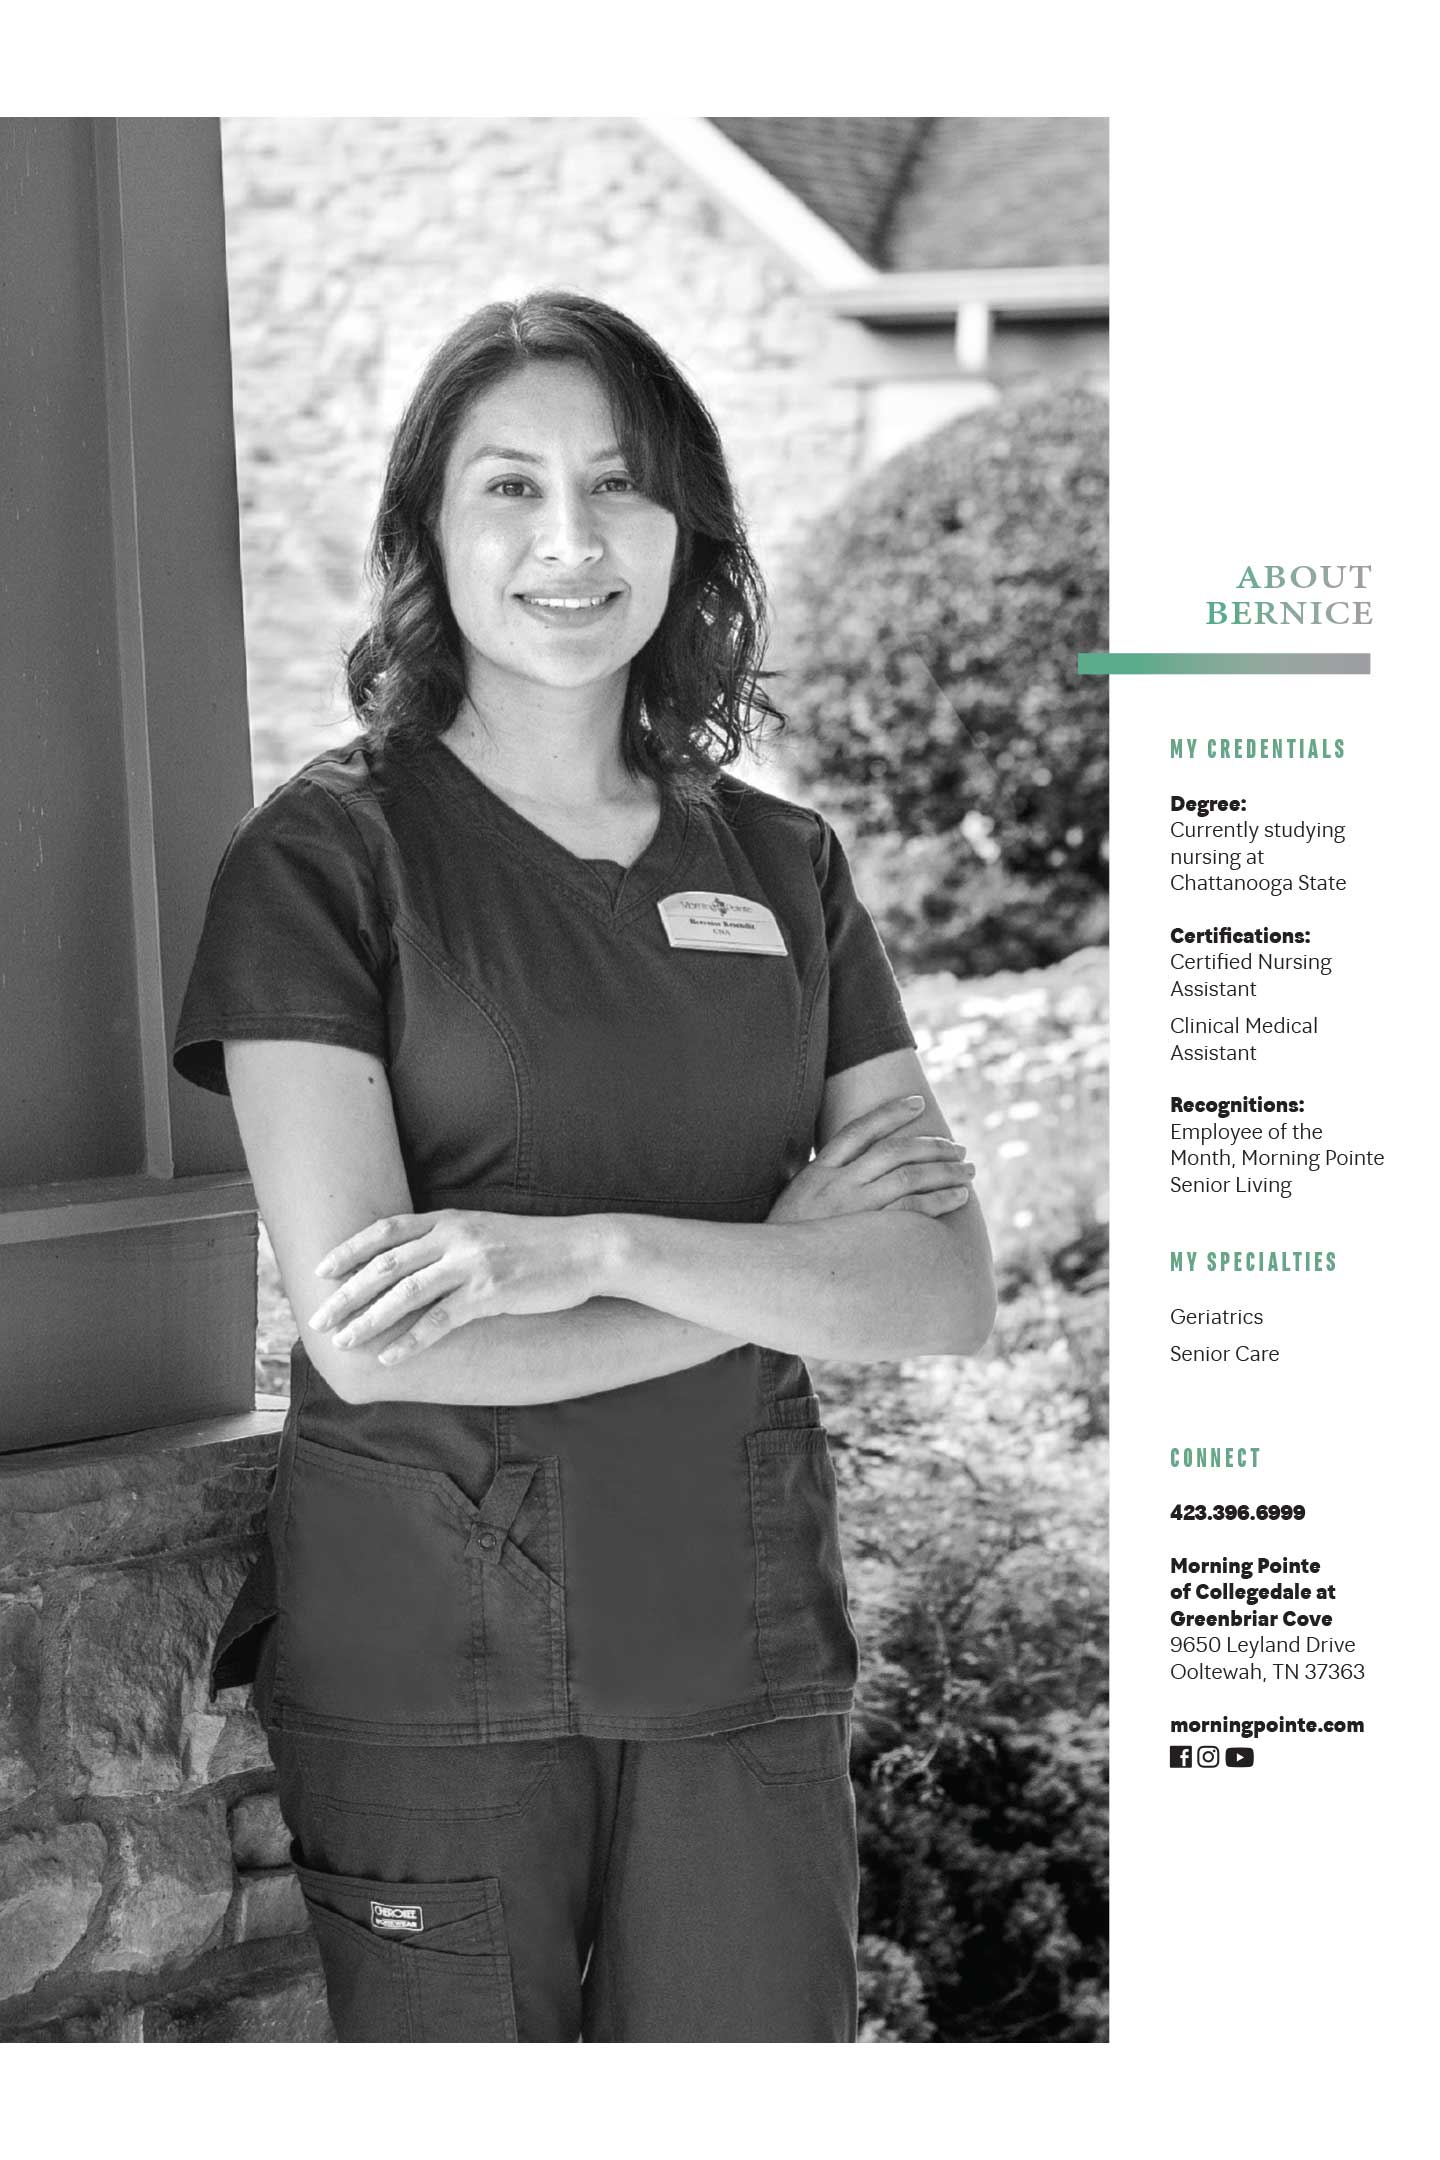 Bernice H. Resendiz, CNA at morning pointe senior living in chattanooga meet our caregivers certifications